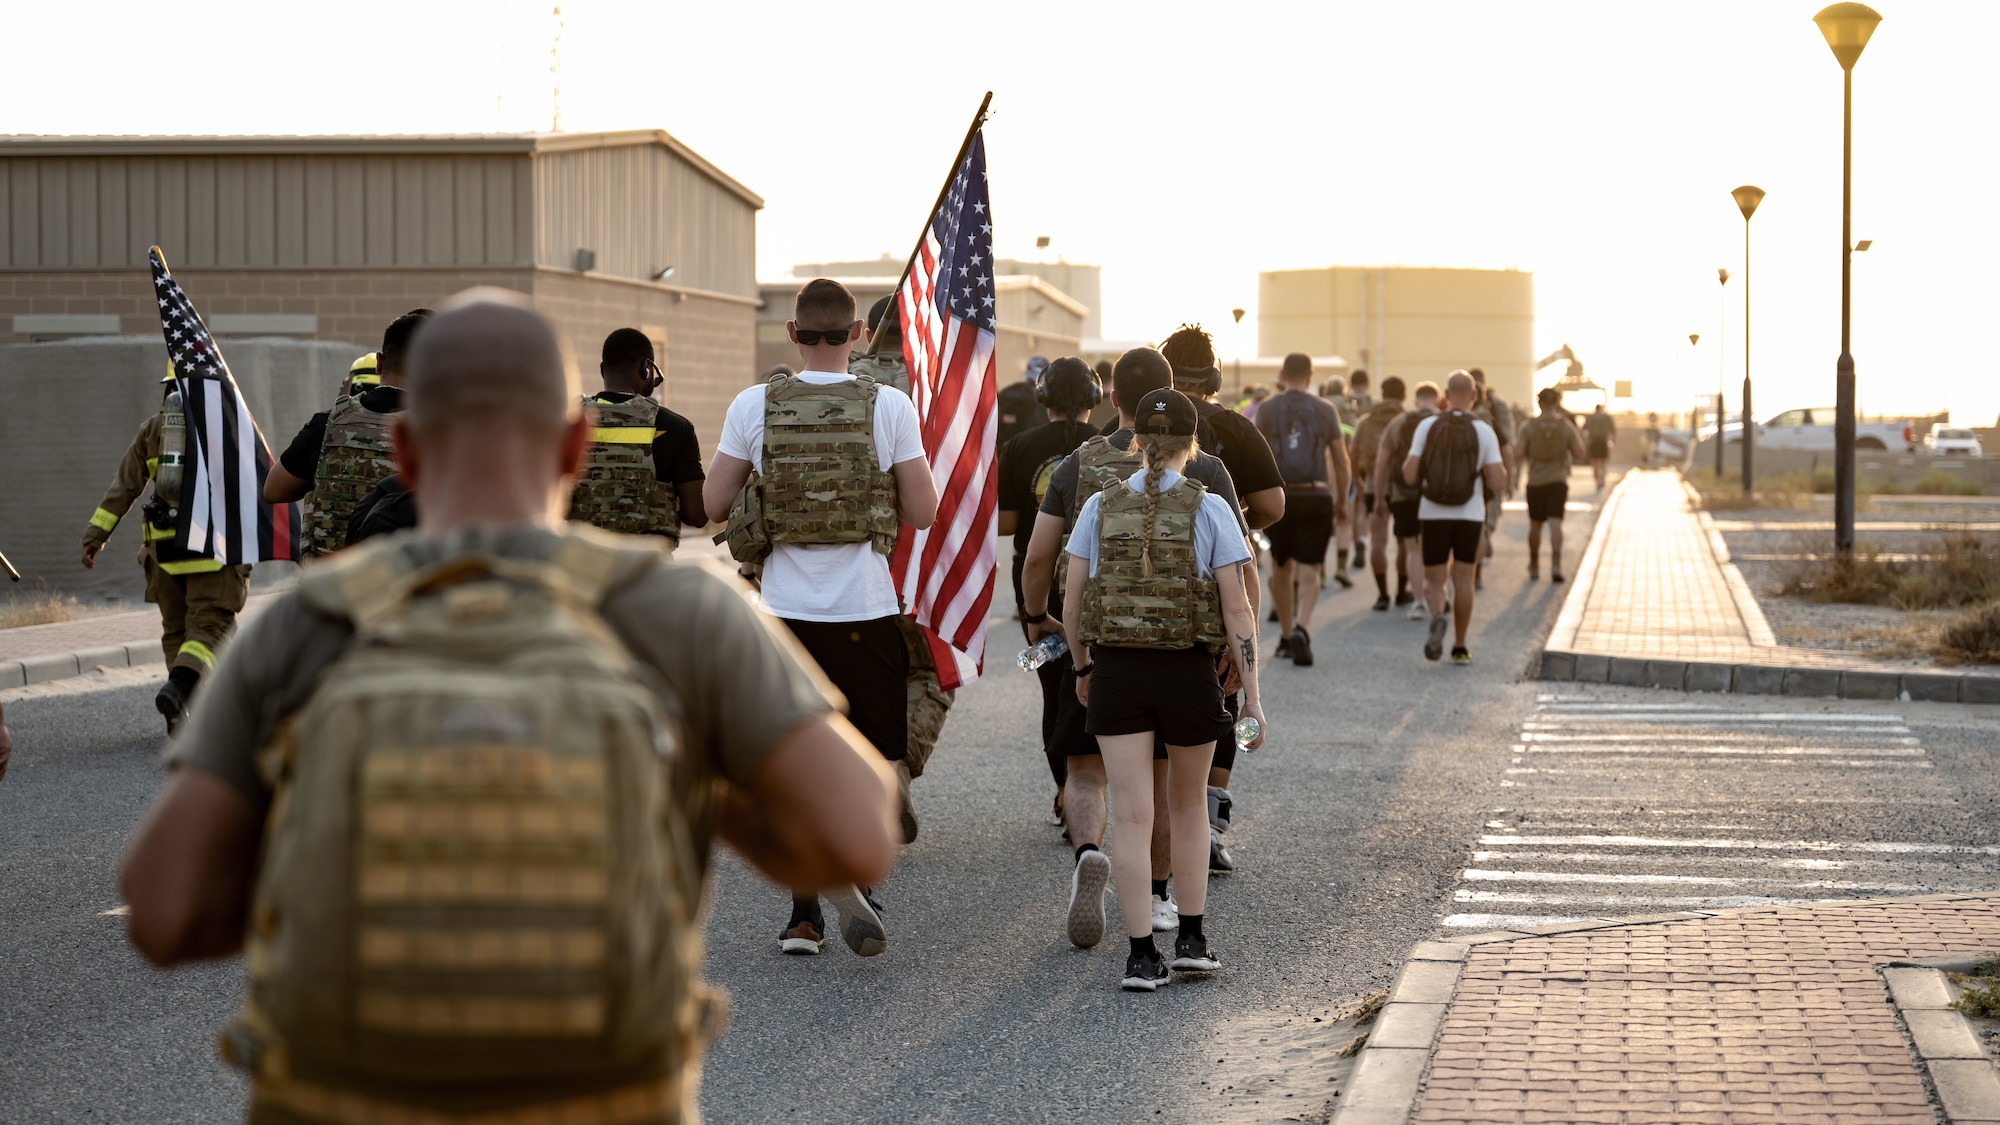 Service members from multiple nations across the base begin the 9/11 memorial ruck at Ali Al Salem Air Base, Kuwait, Sept. 11, 2023. Service members from the U.S., Canada, Italy, and Denmark gathered together today for a moment of silence followed by a ruck march in remembrance of the innocent lives lost during the attacks on this fateful day 22 years ago. Sharing the past with our coalition partners secures a brighter future for us all. (U.S. Air Force photo by Staff Sgt. Kevin Long)